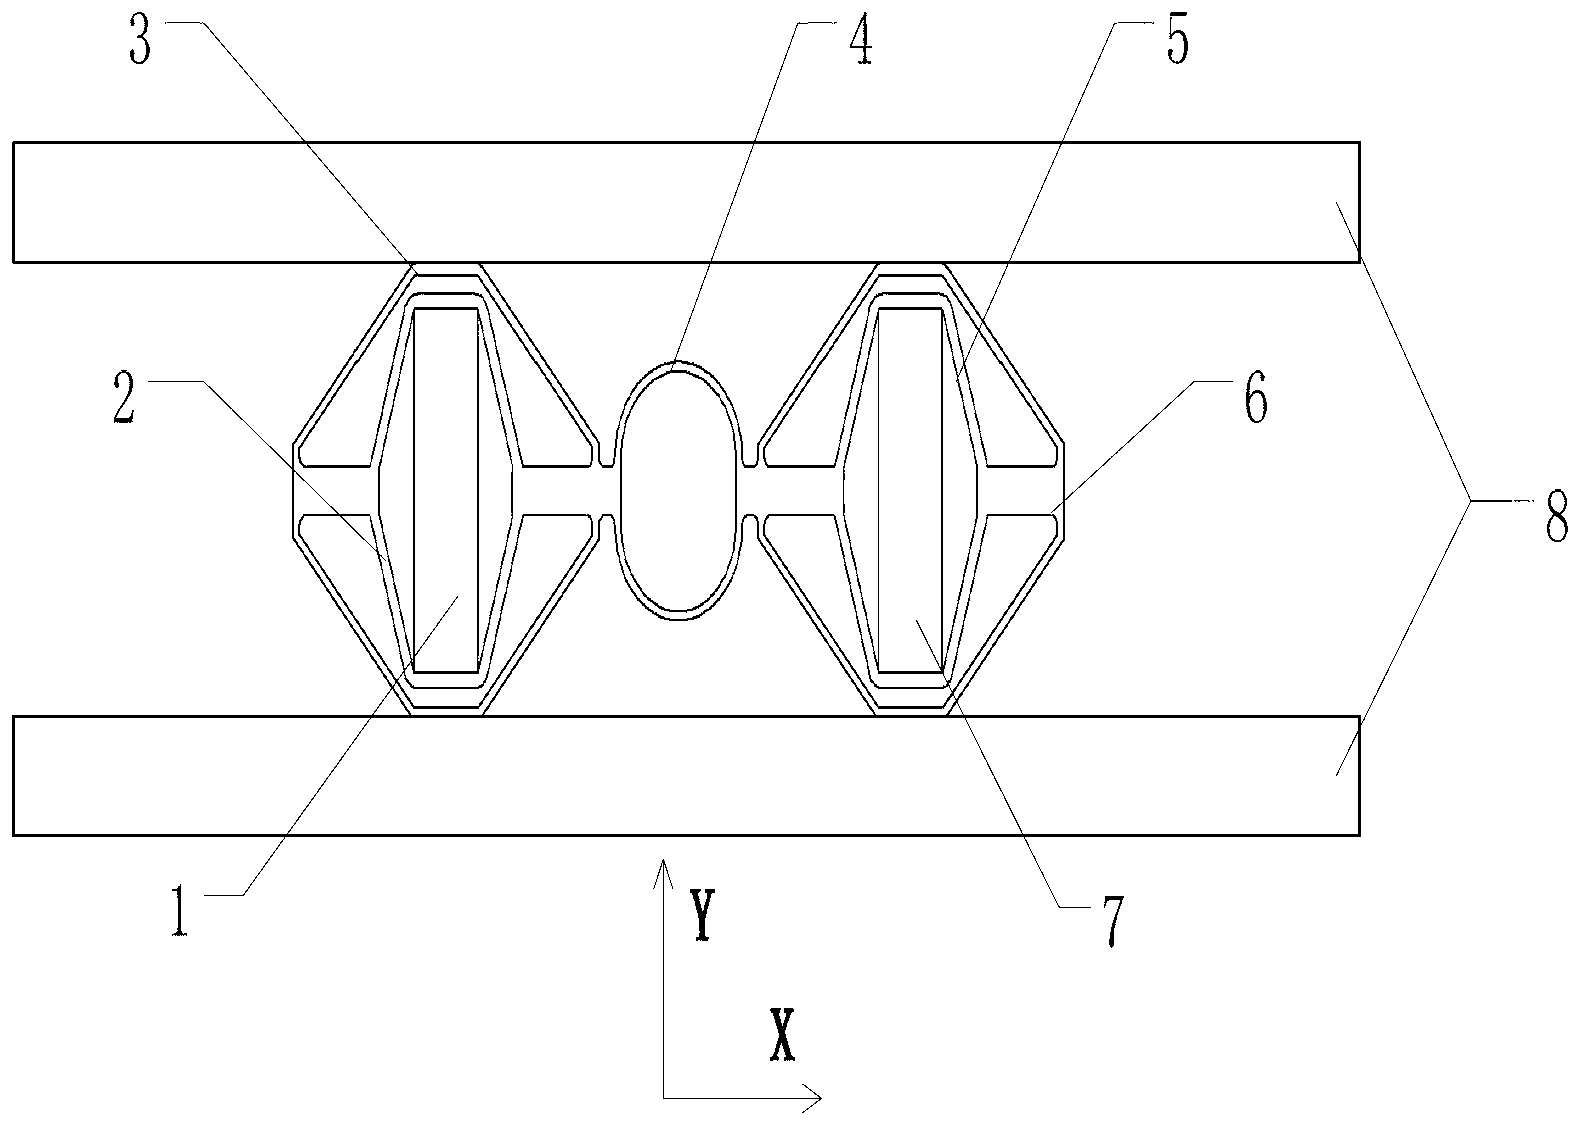 Stepping type actuator driven by double piezoelectric stacks